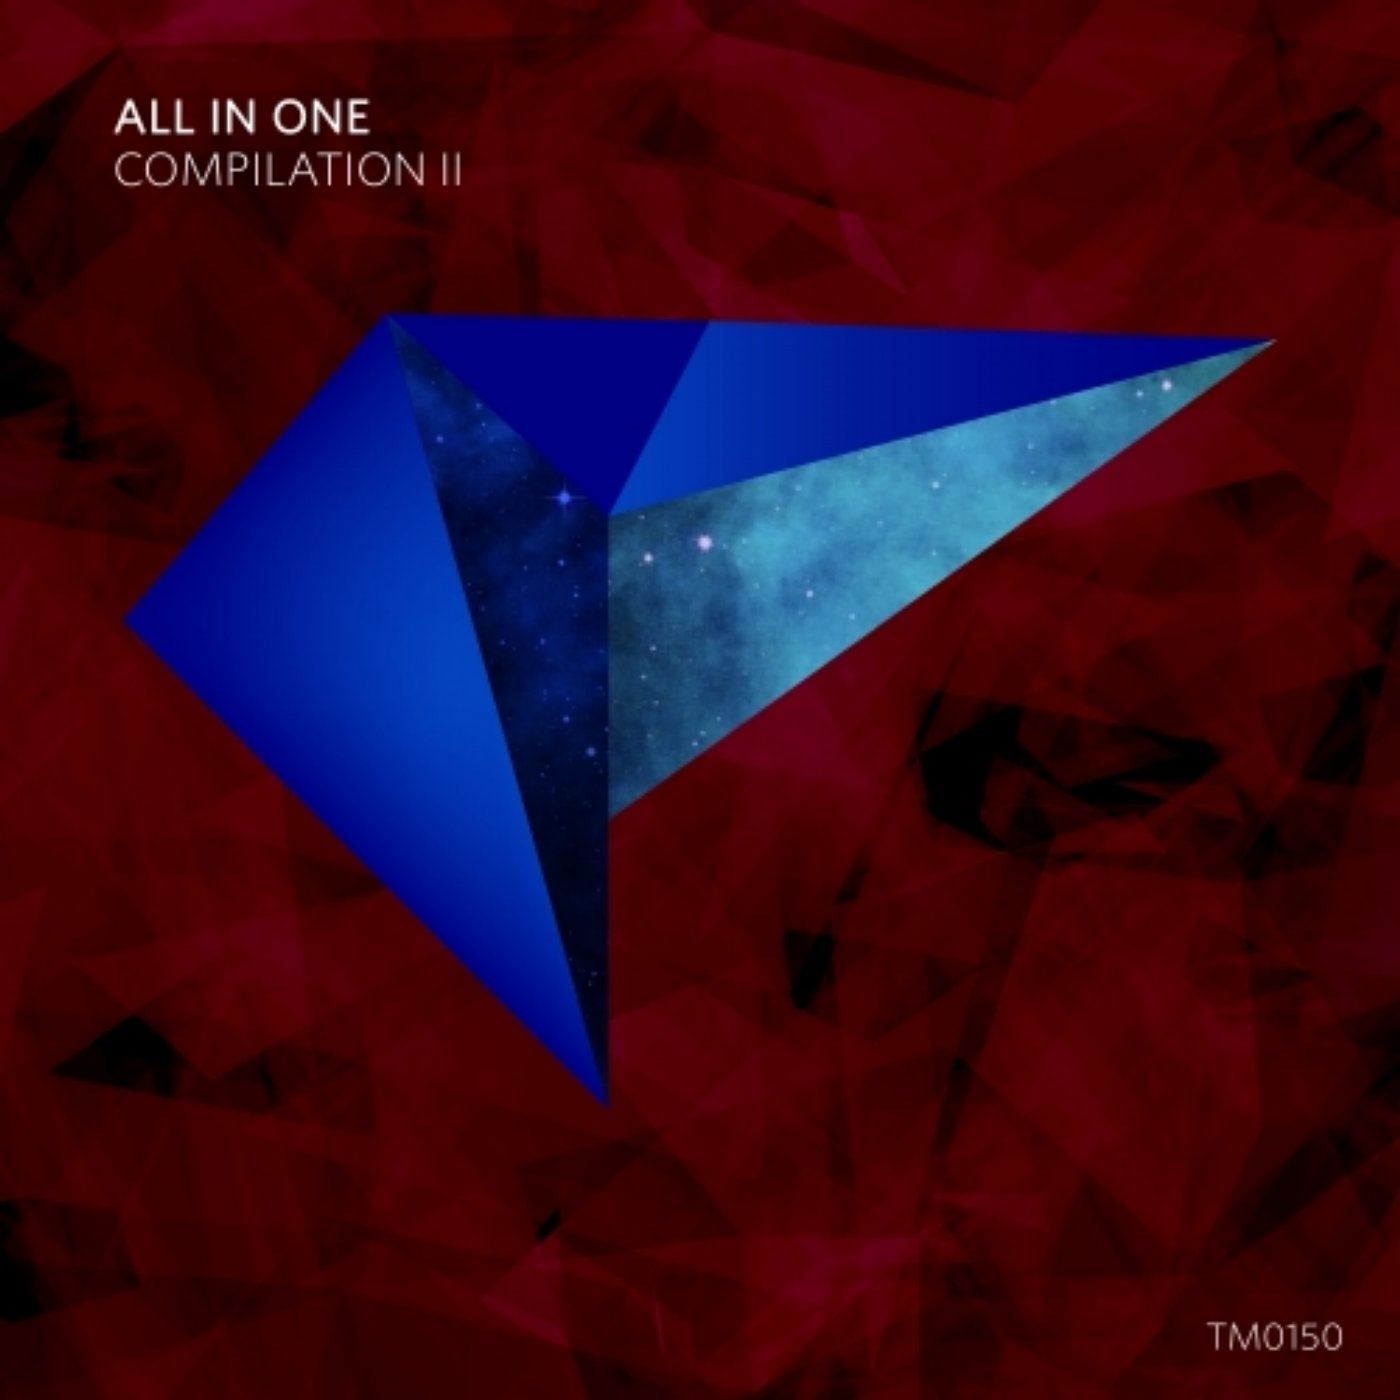 ALL IN ONE COMPILATION II